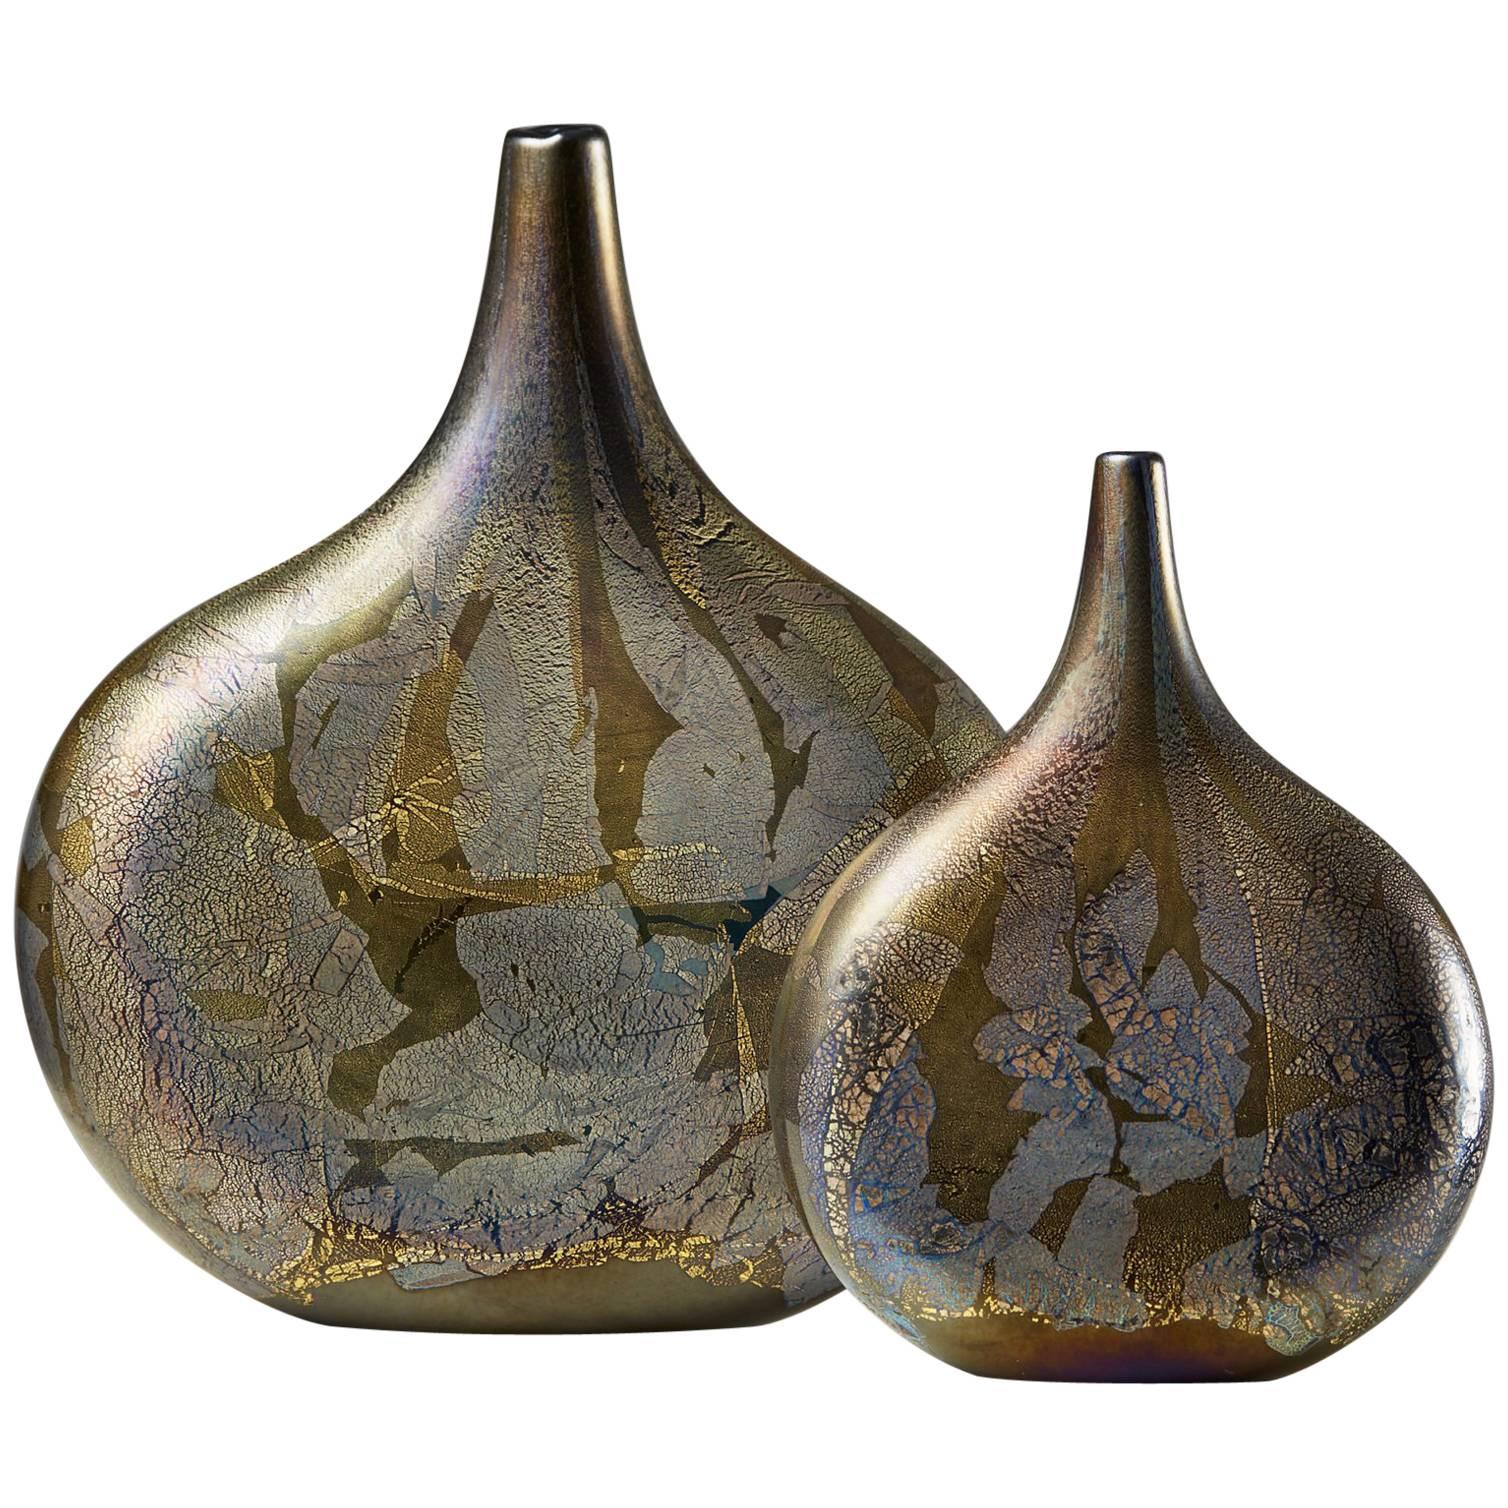 Pair of Vases Designed by Michael Harris for Isle of Wight Glass, UK, 1990s